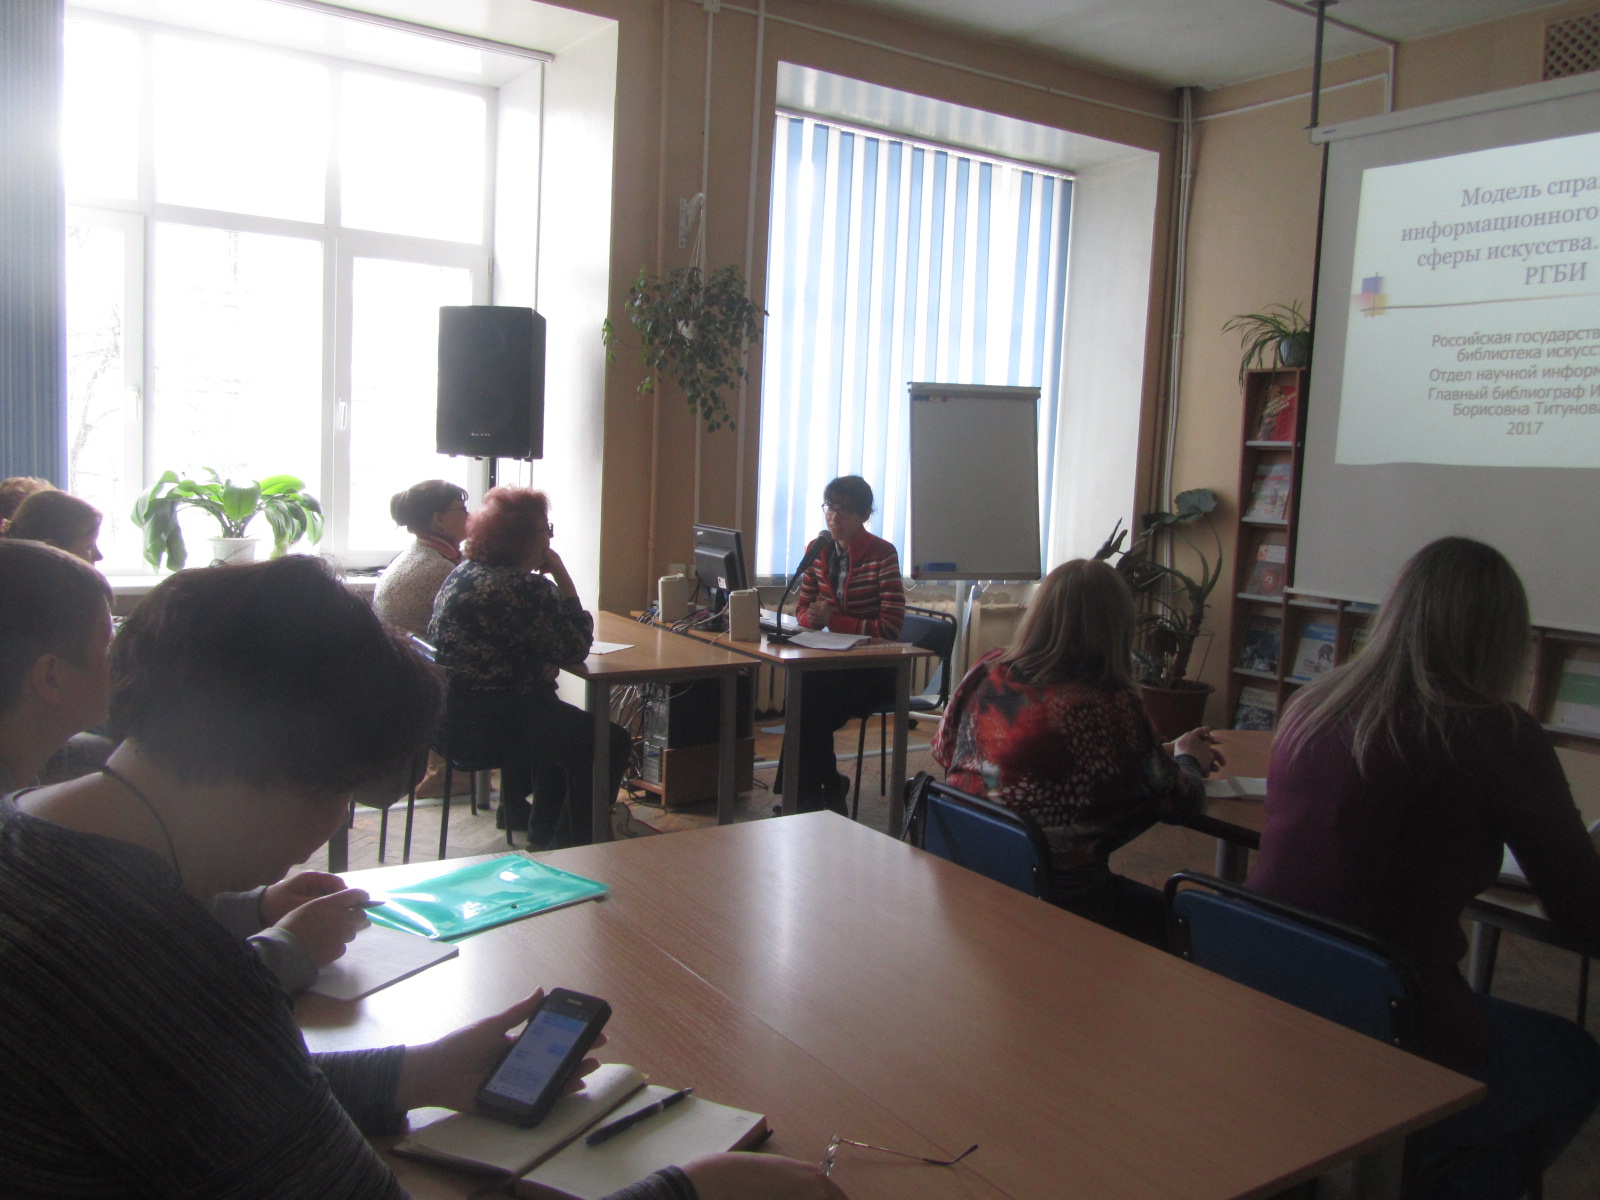 Seminar “Resources on culture and art in reference and information services”